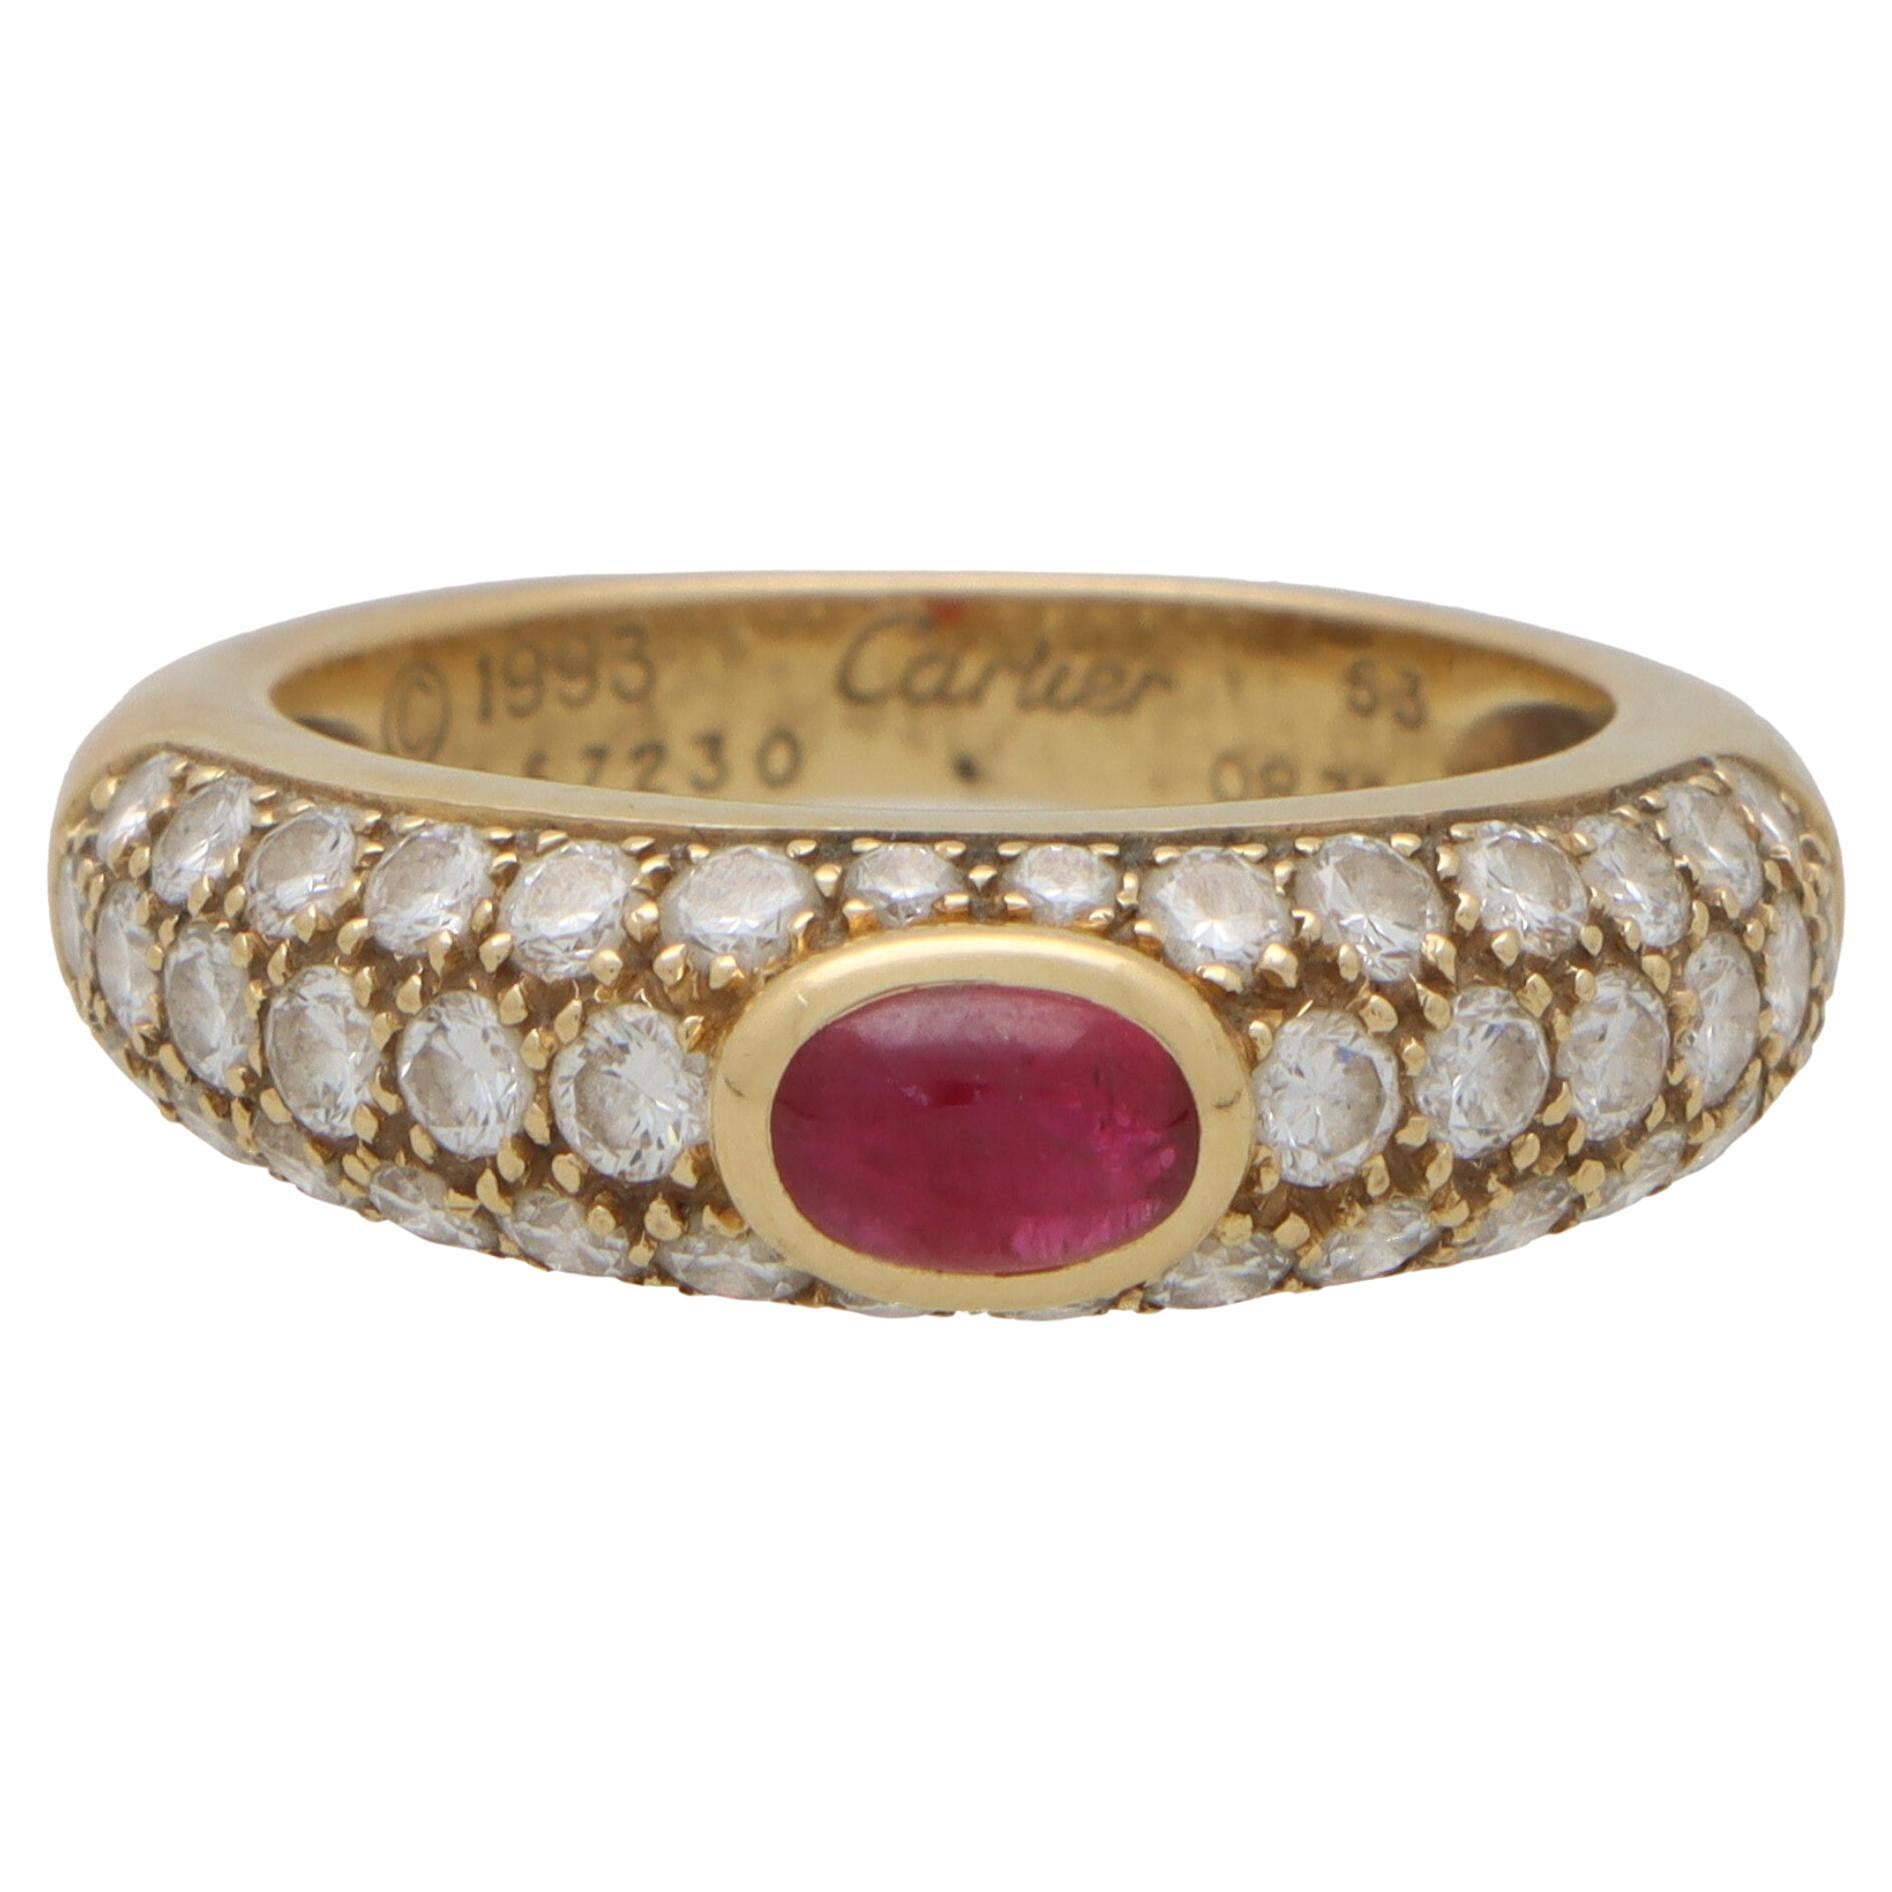 Vintage Cartier Mimi Ruby and Diamond Ring in 18k Yellow Gold